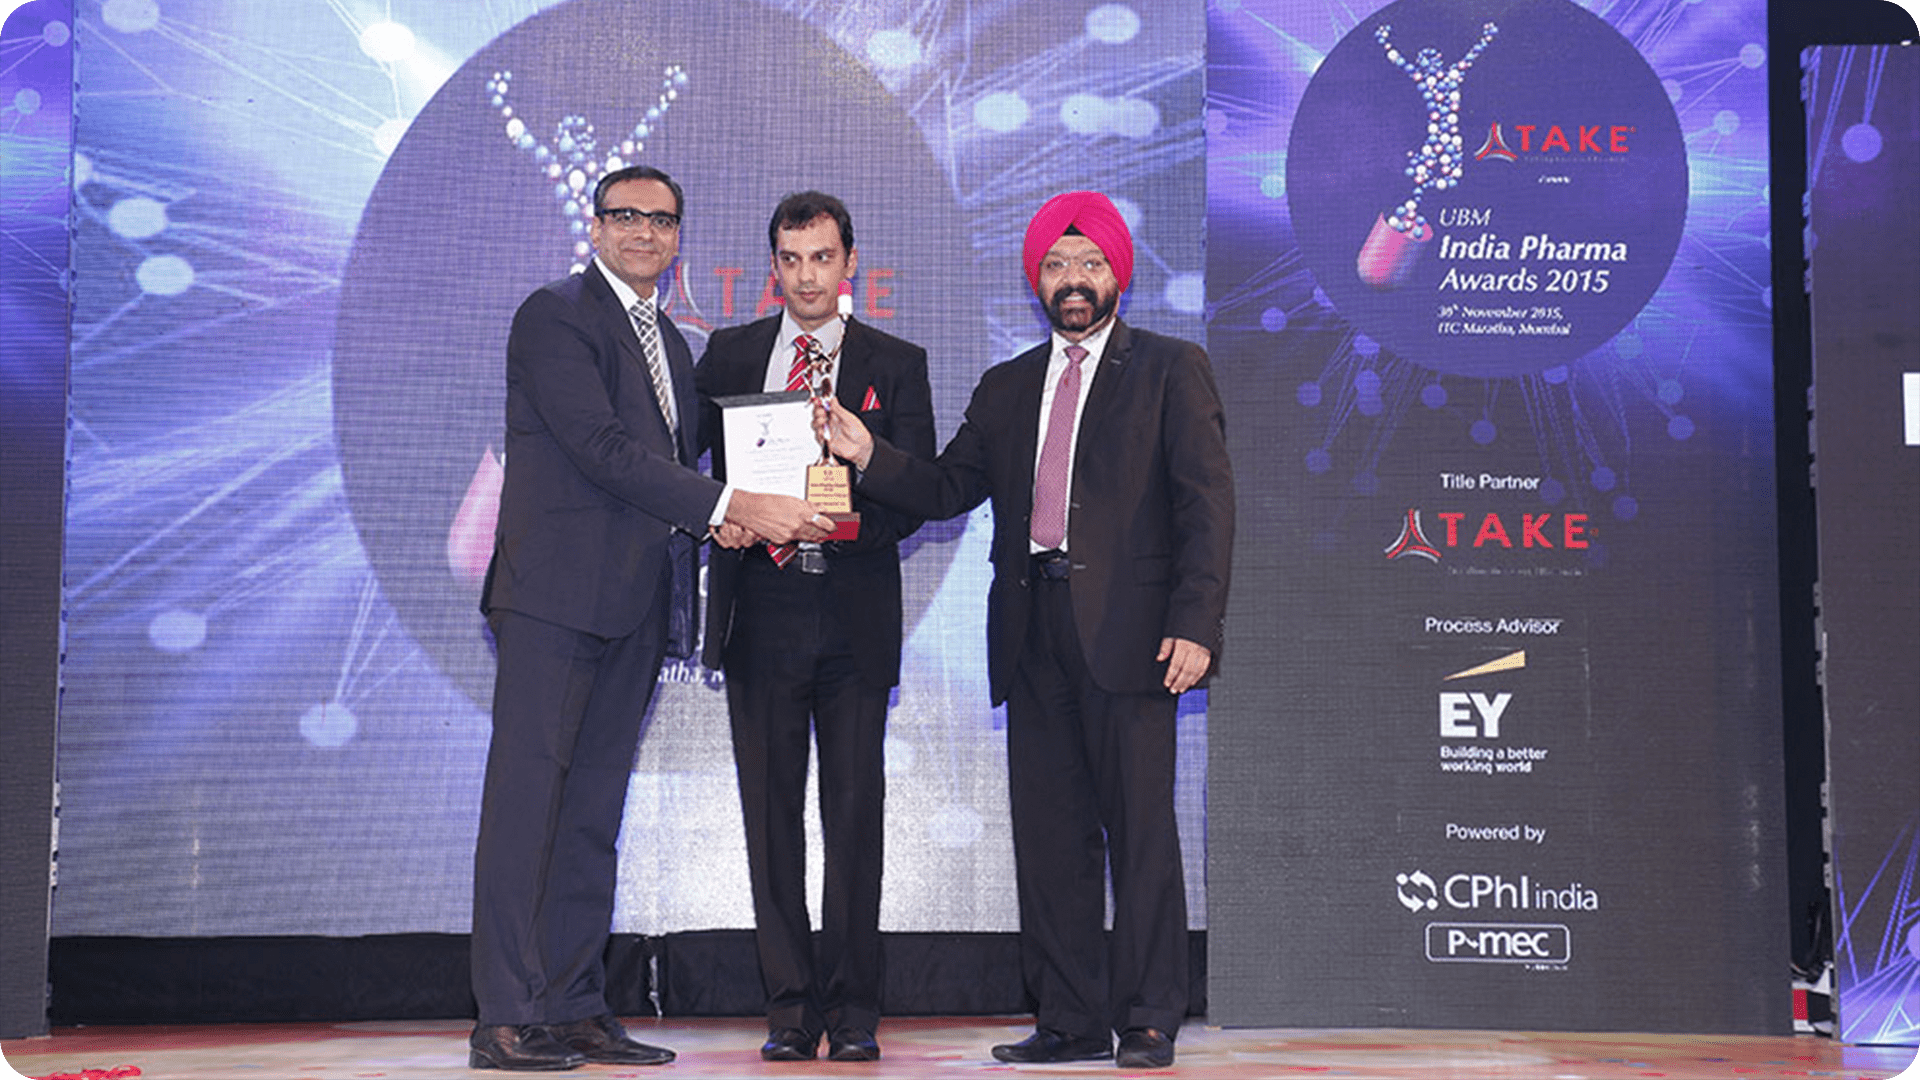 Emerging Exporter of the Year - Indian Pharma Awards 2015